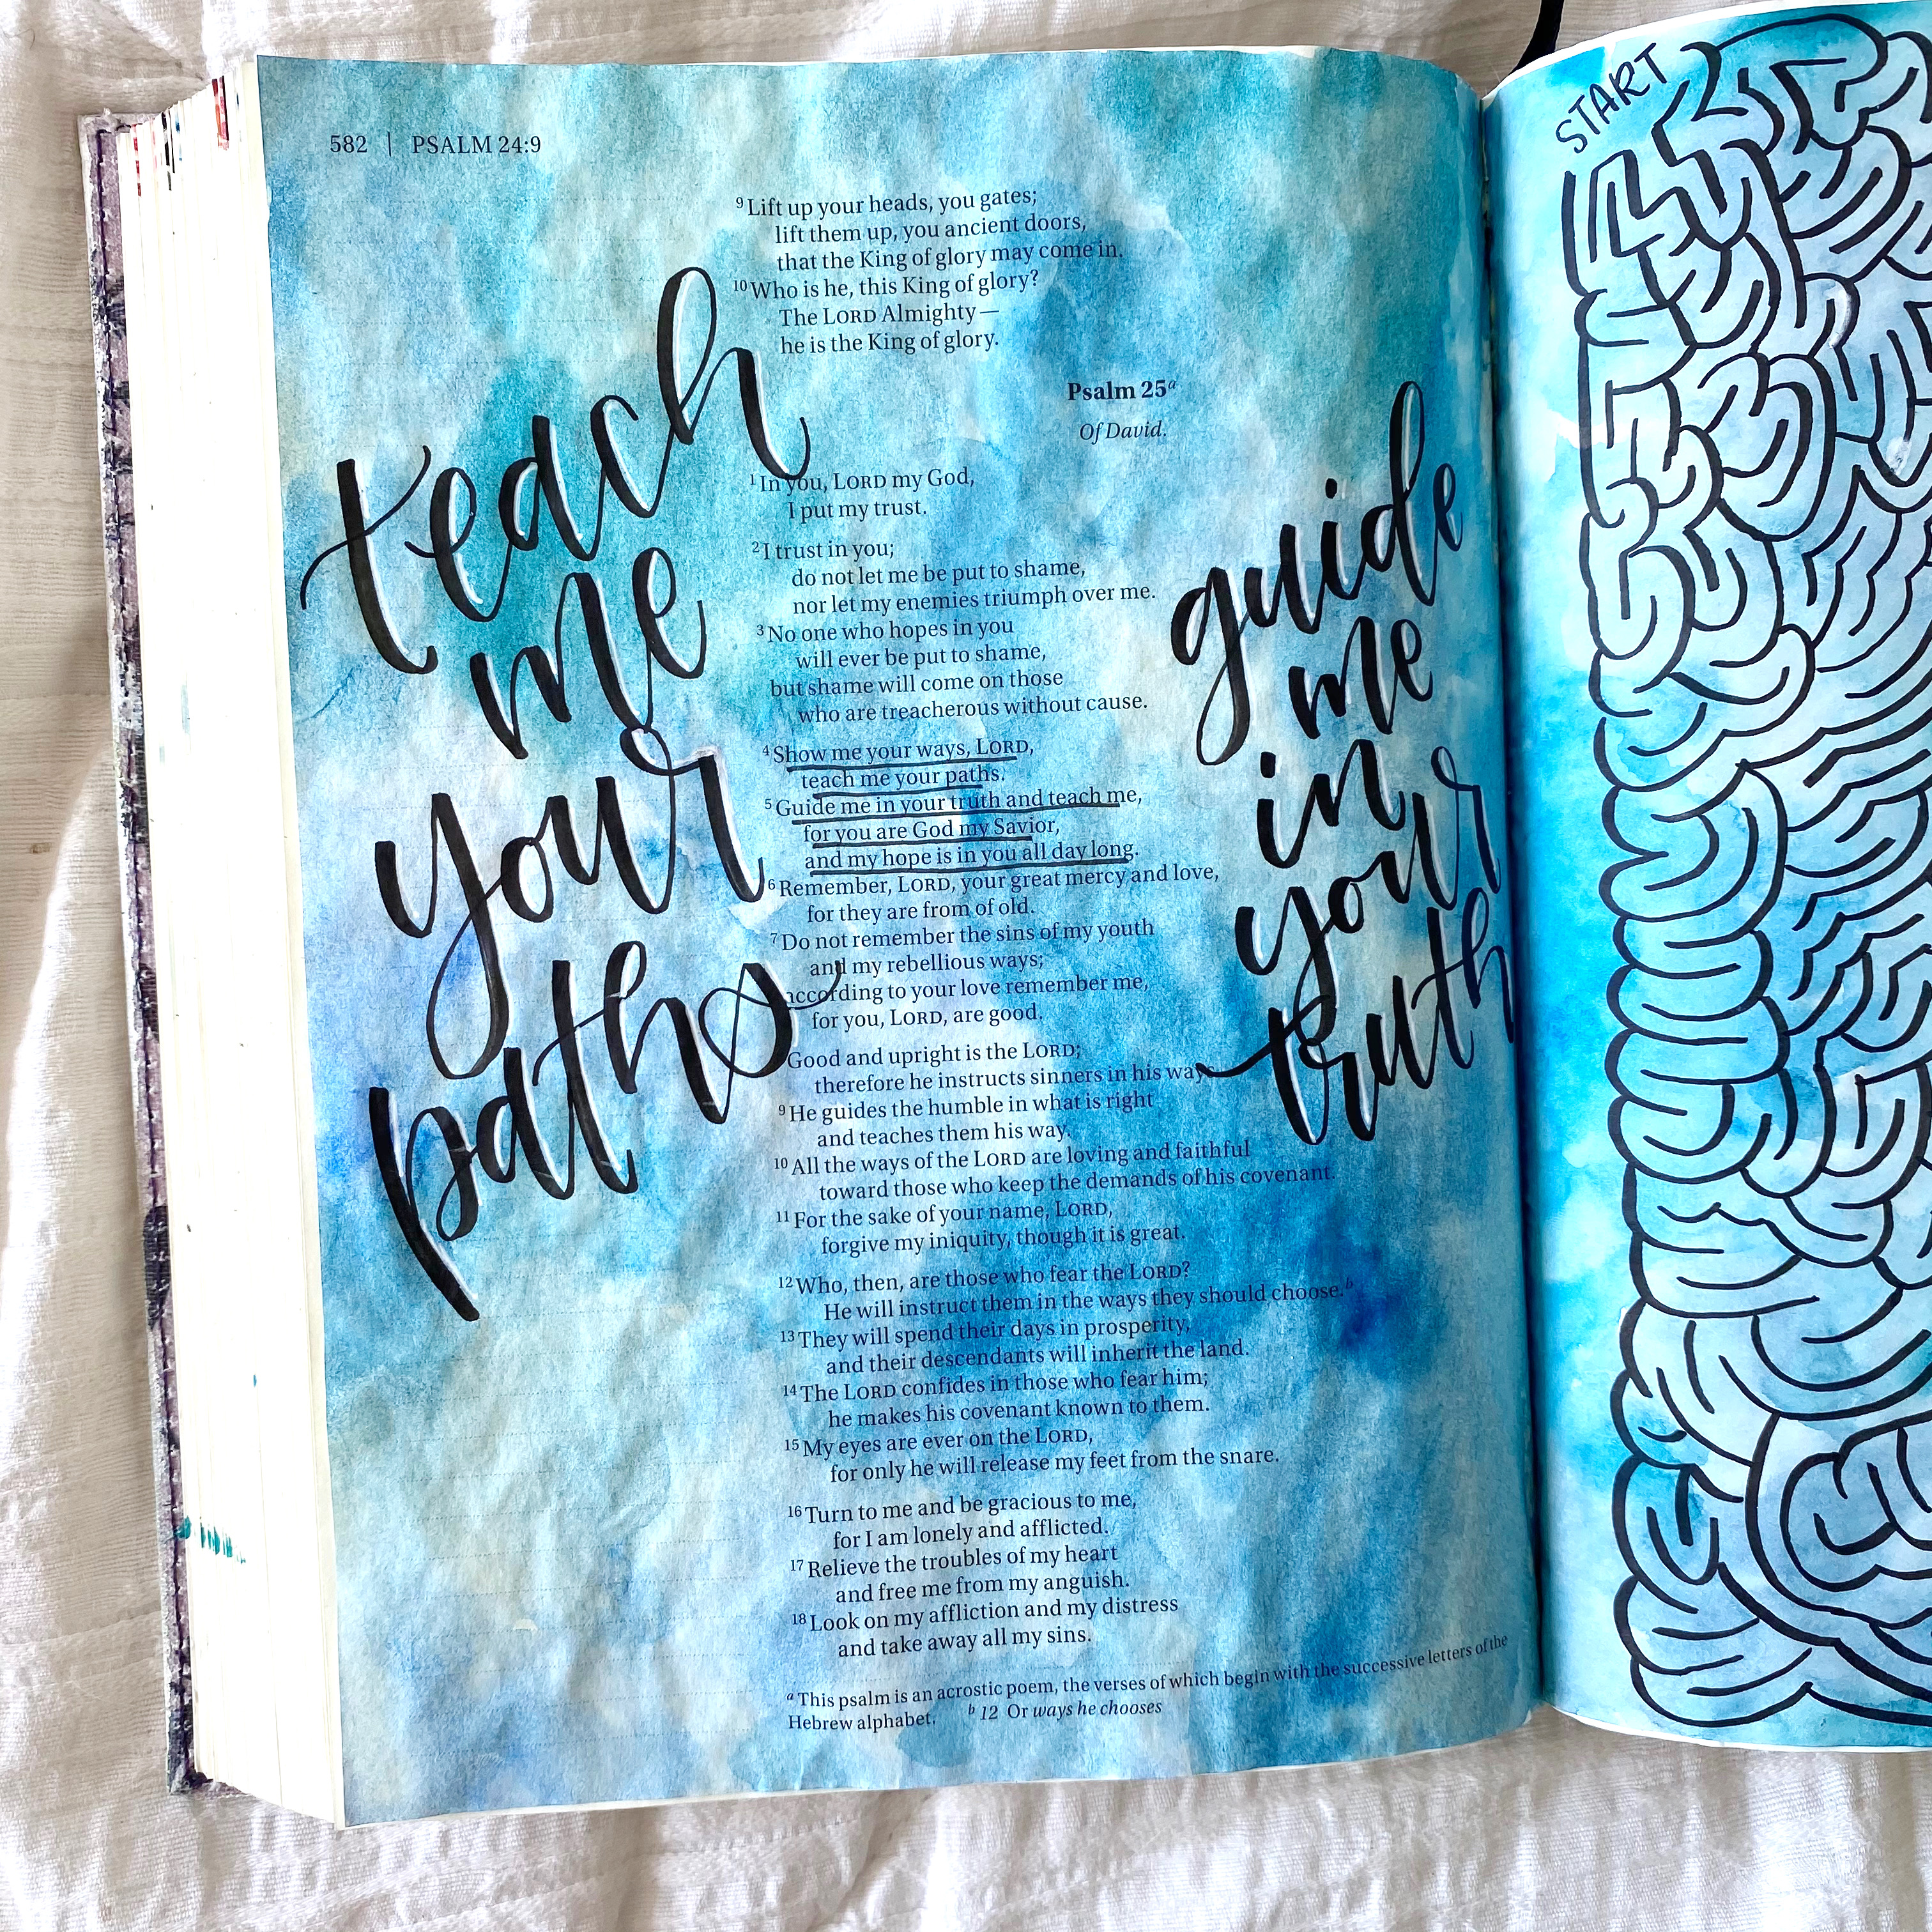 Scribbling Grace Bible Journaling With FREE Maze Printable